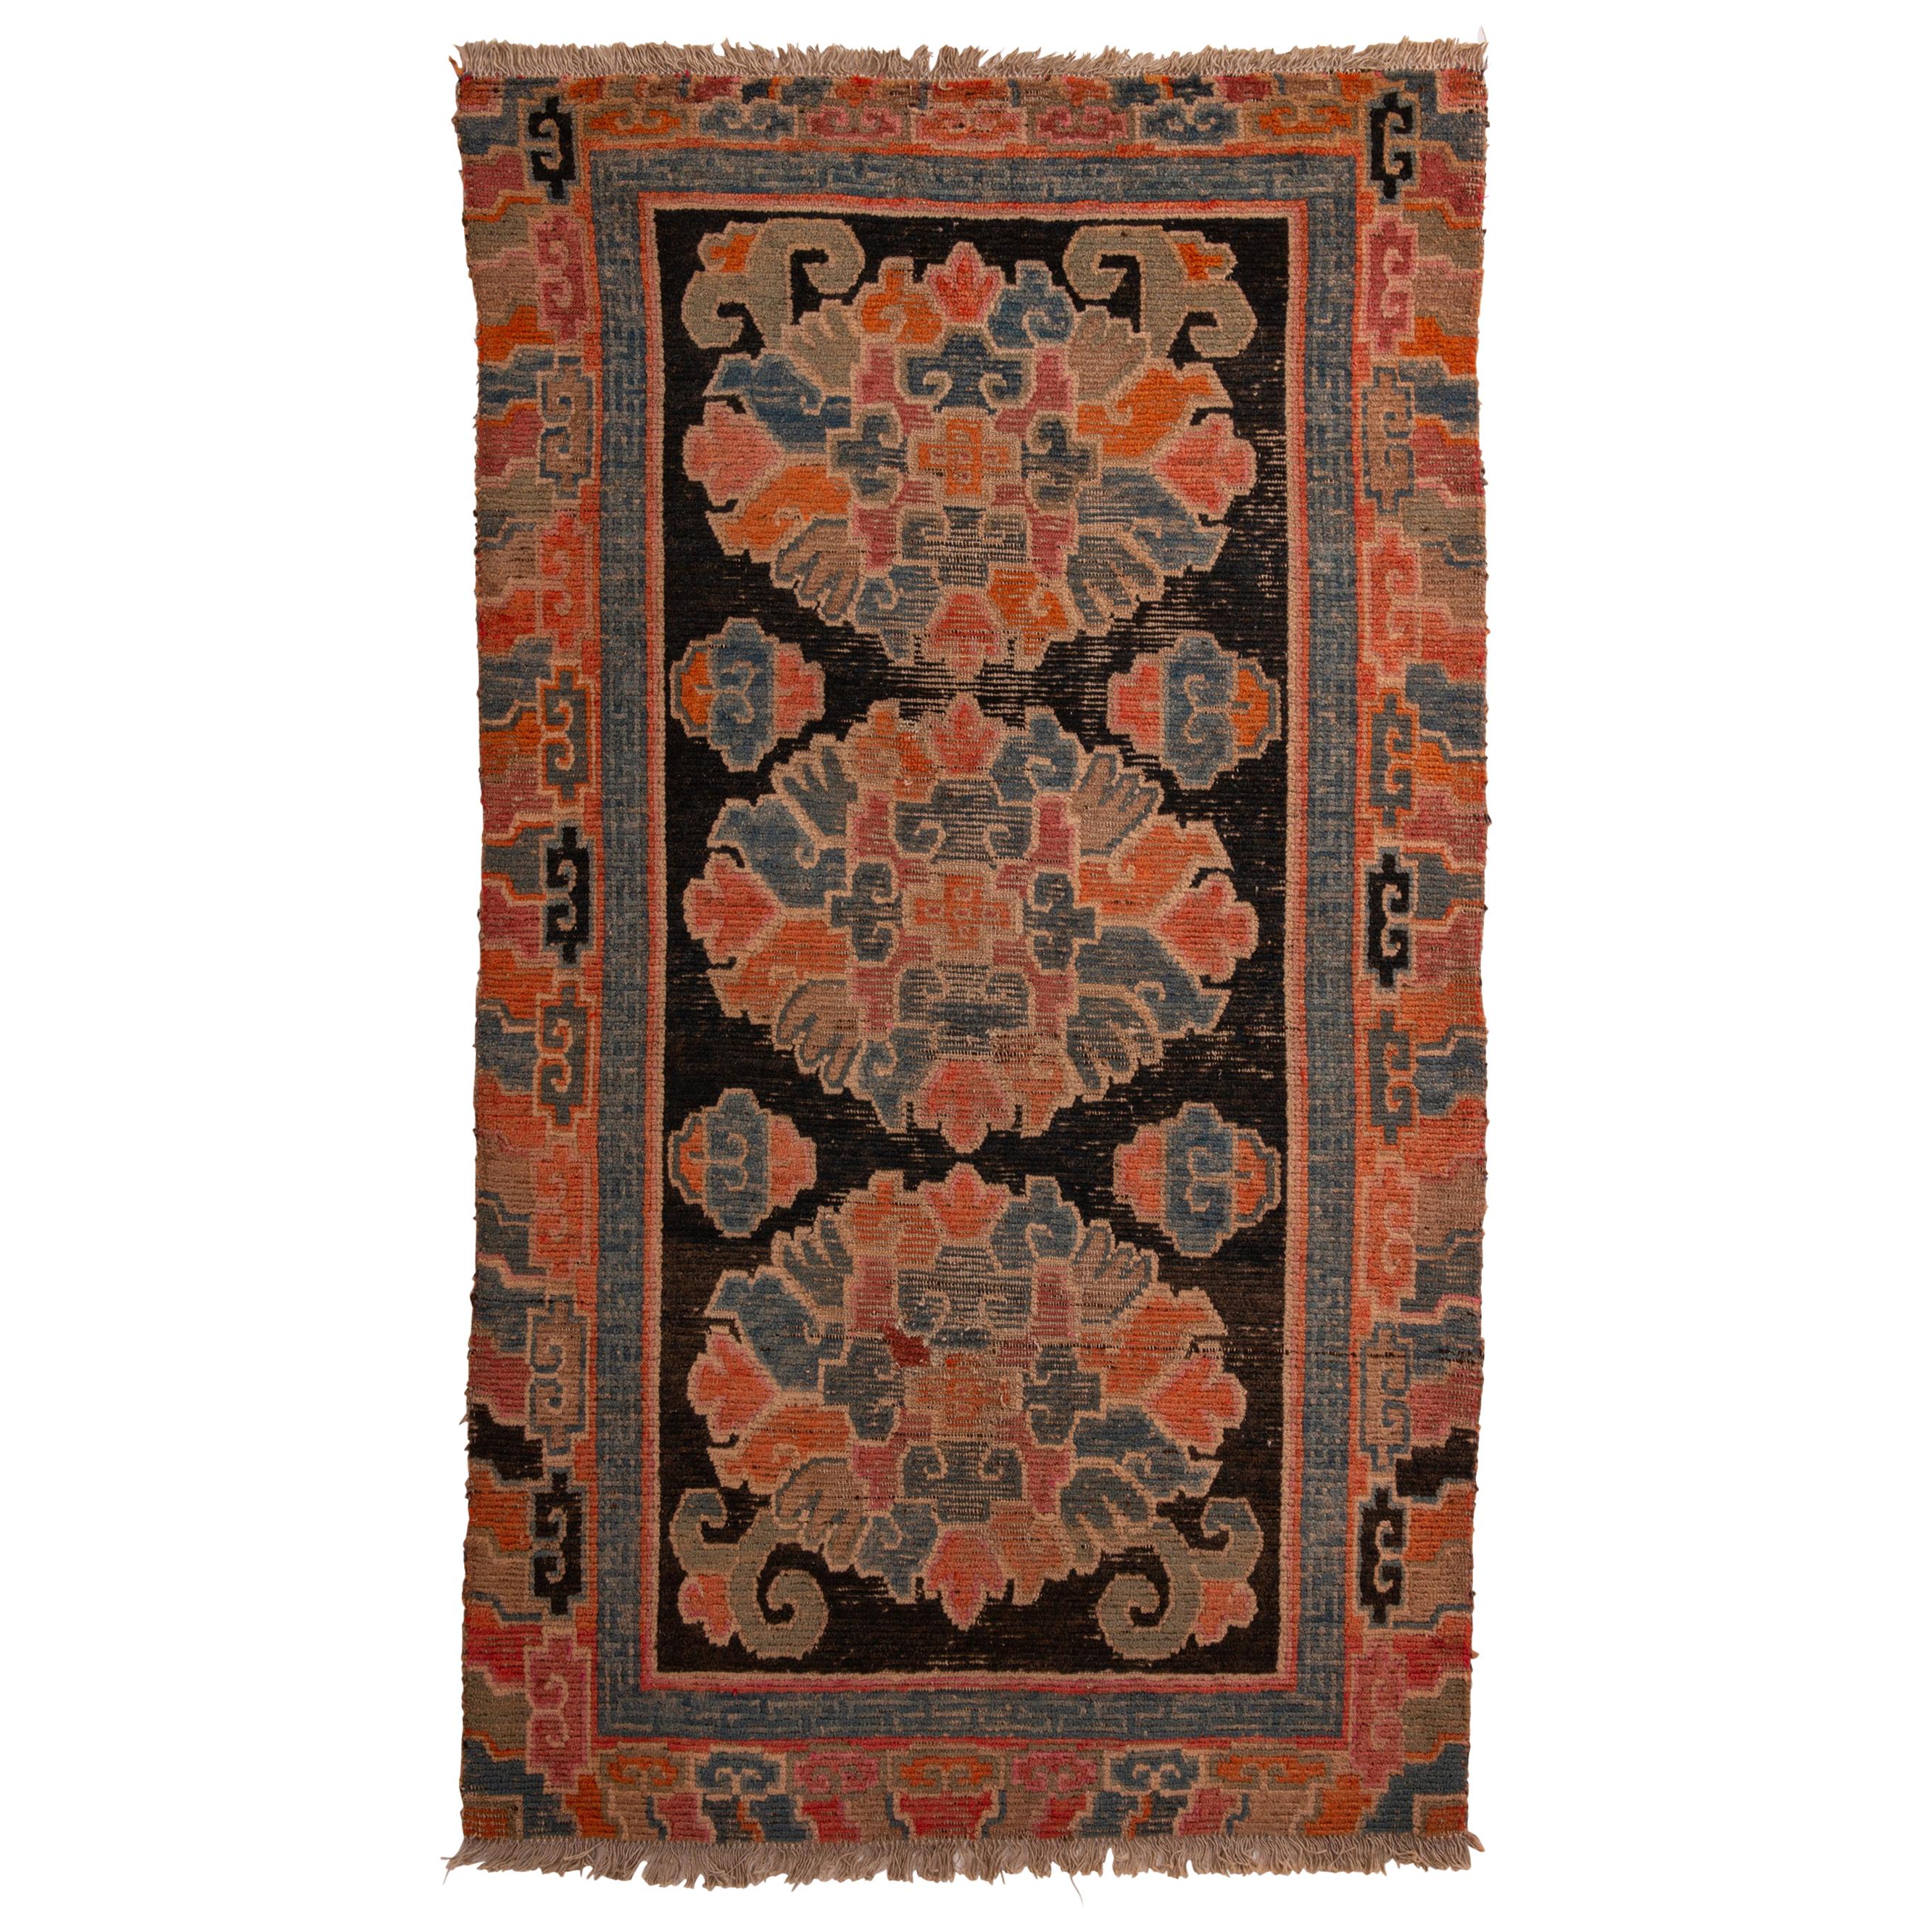 Tibetan Antique Carpet from Private Collection